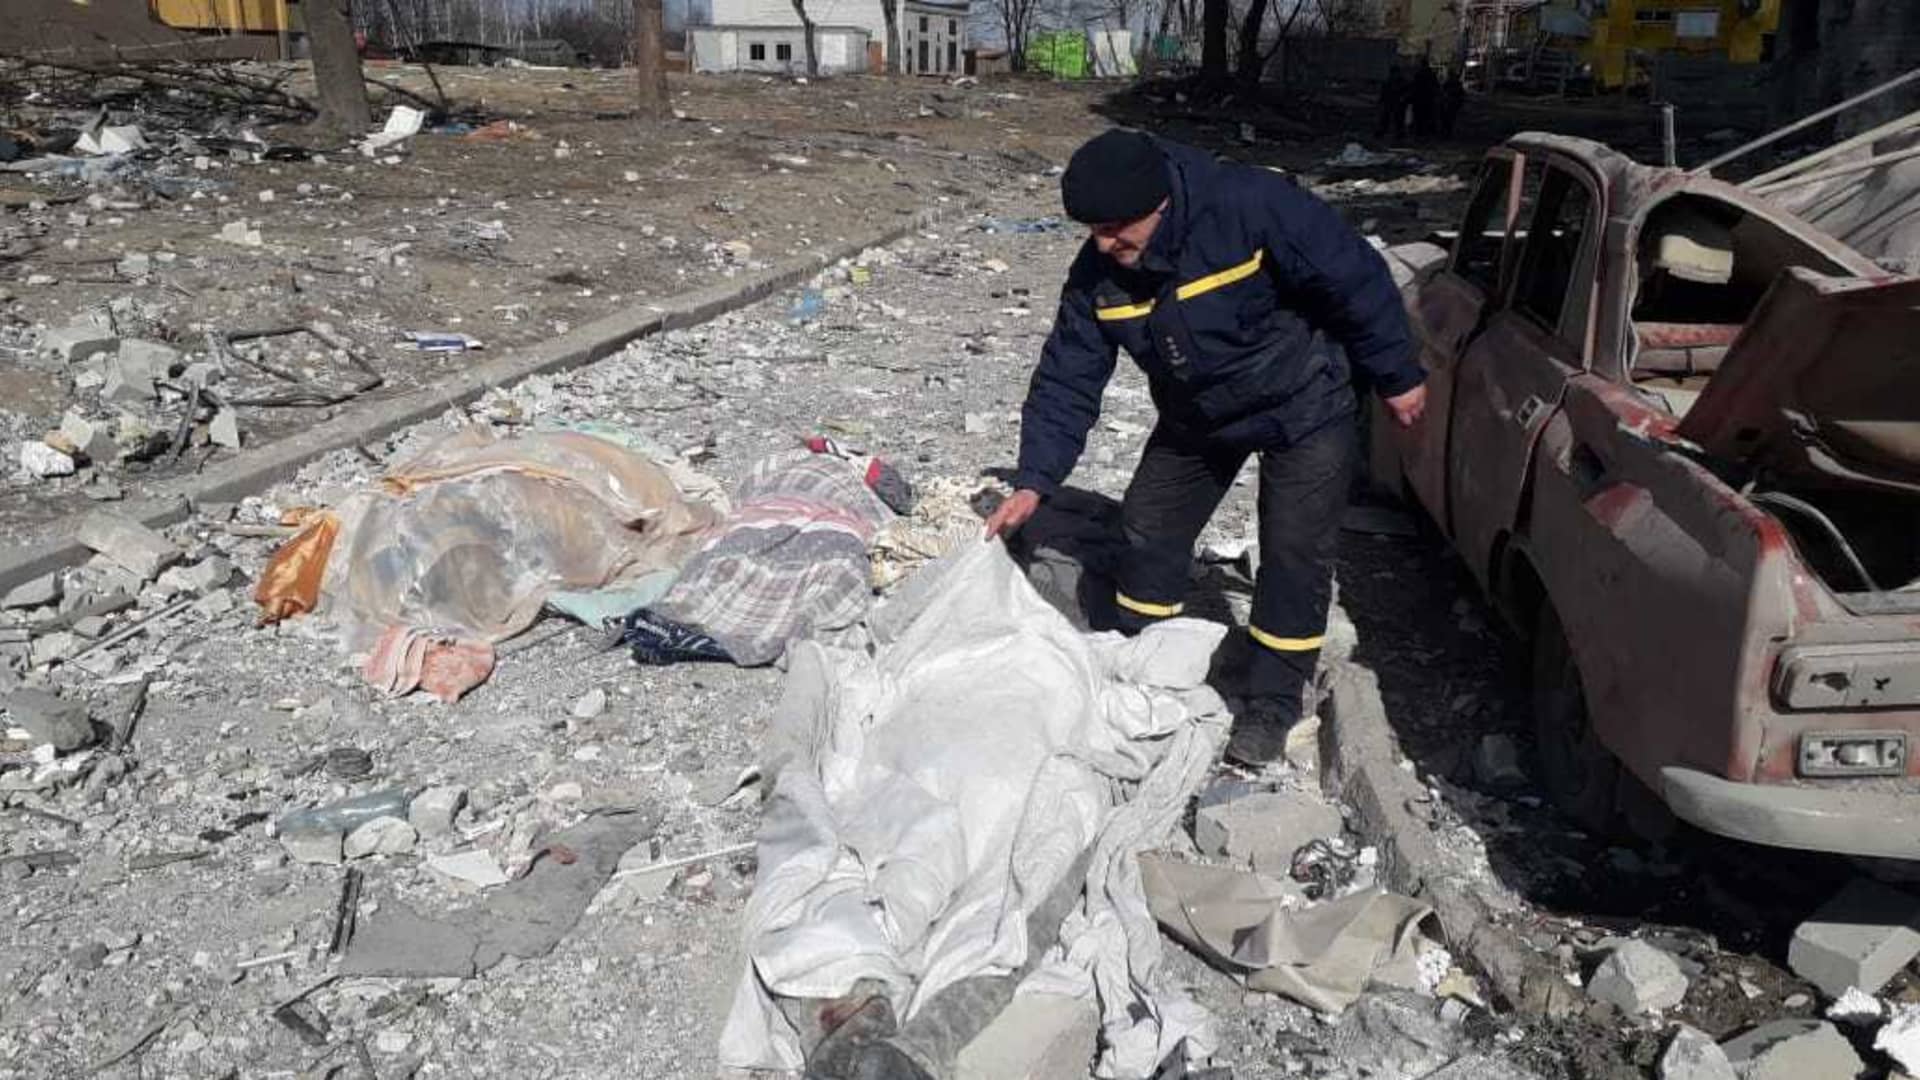 A man covers a dead body after a residential buildings hit by a Russian attack in Chernihiv, Ukraine on March 17, 2022.